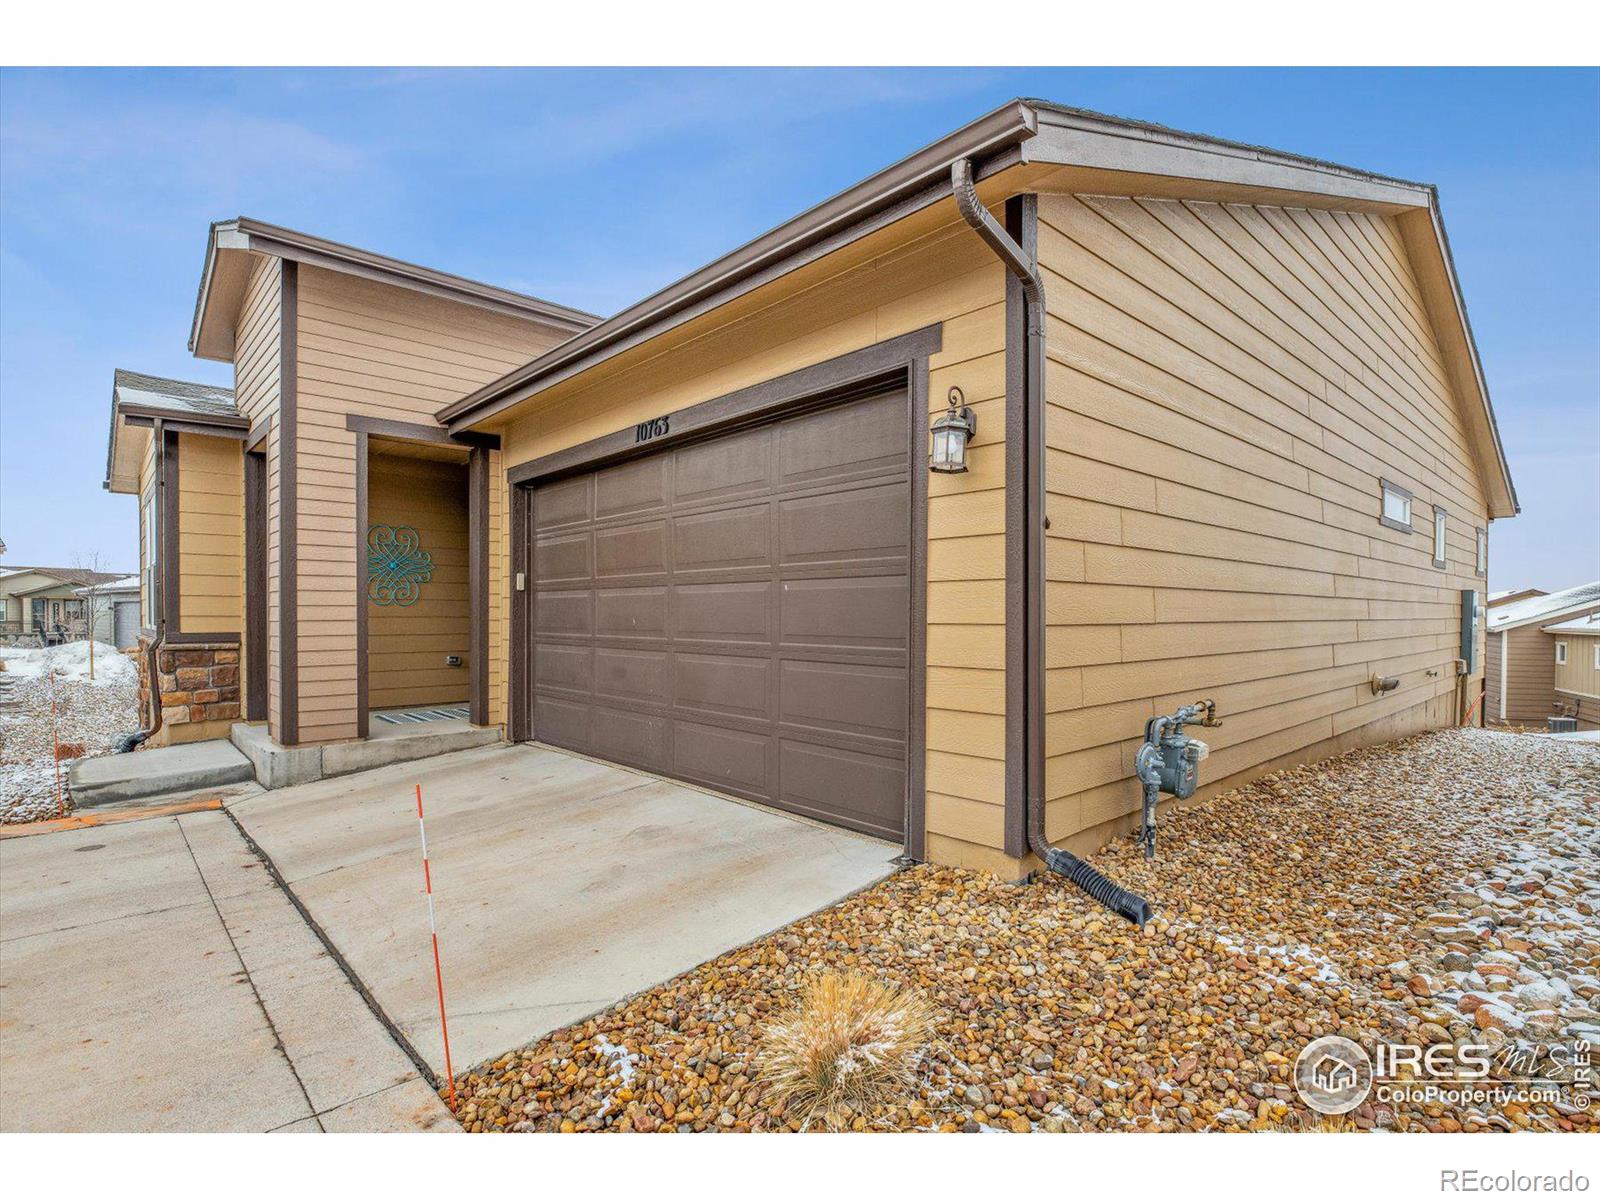 Report Image for 10763 N Montane Drive,Broomfield, Colorado